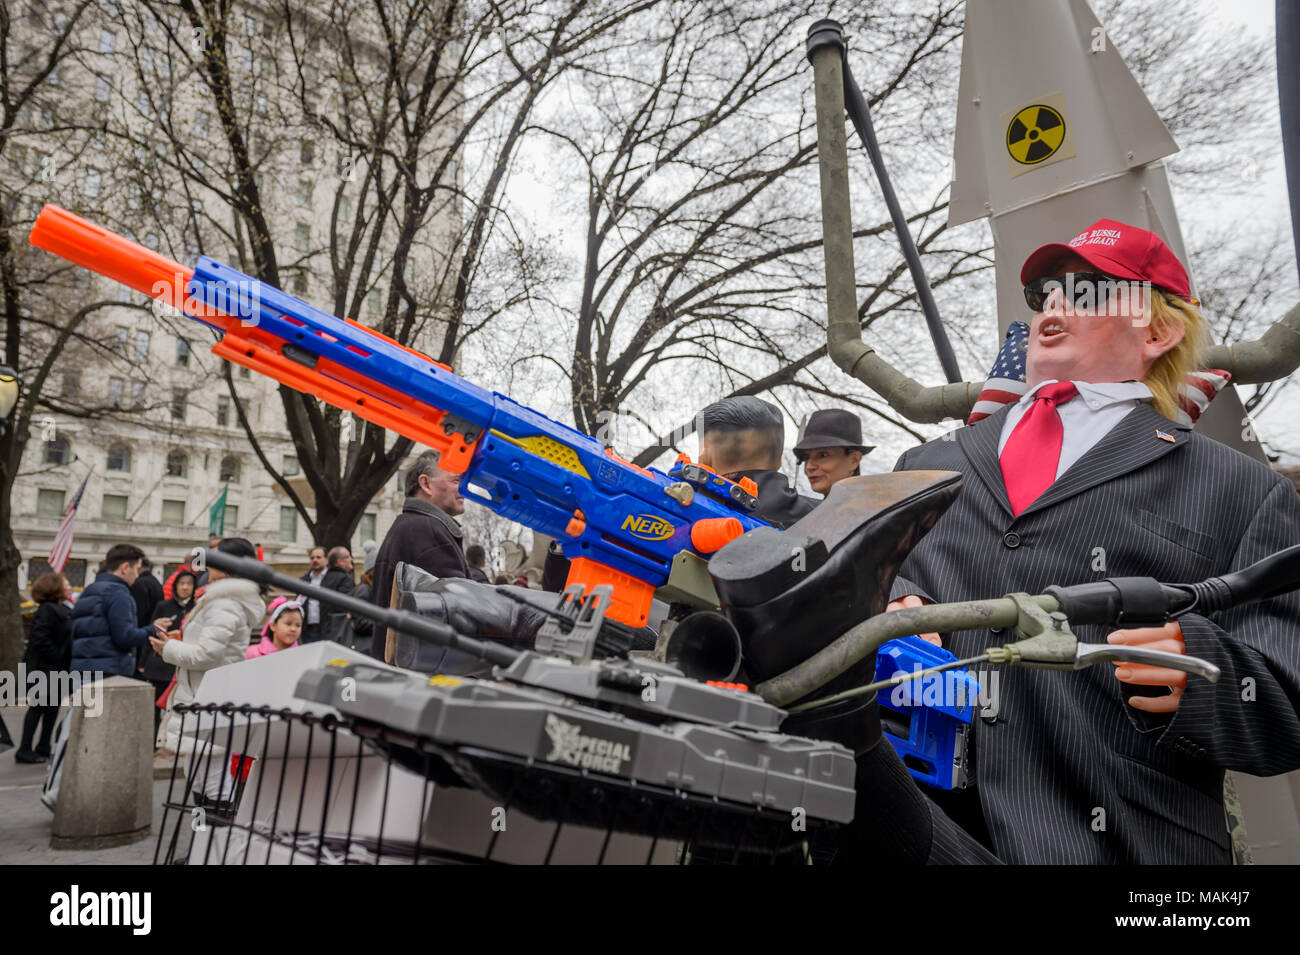 Mock Donald Trump riding the big guns at the Military Parade - New York's  irreverent April Fools' Day Parade poking fun at the past year's displays  of hype, hypocrisy, deceit, bigotry, and